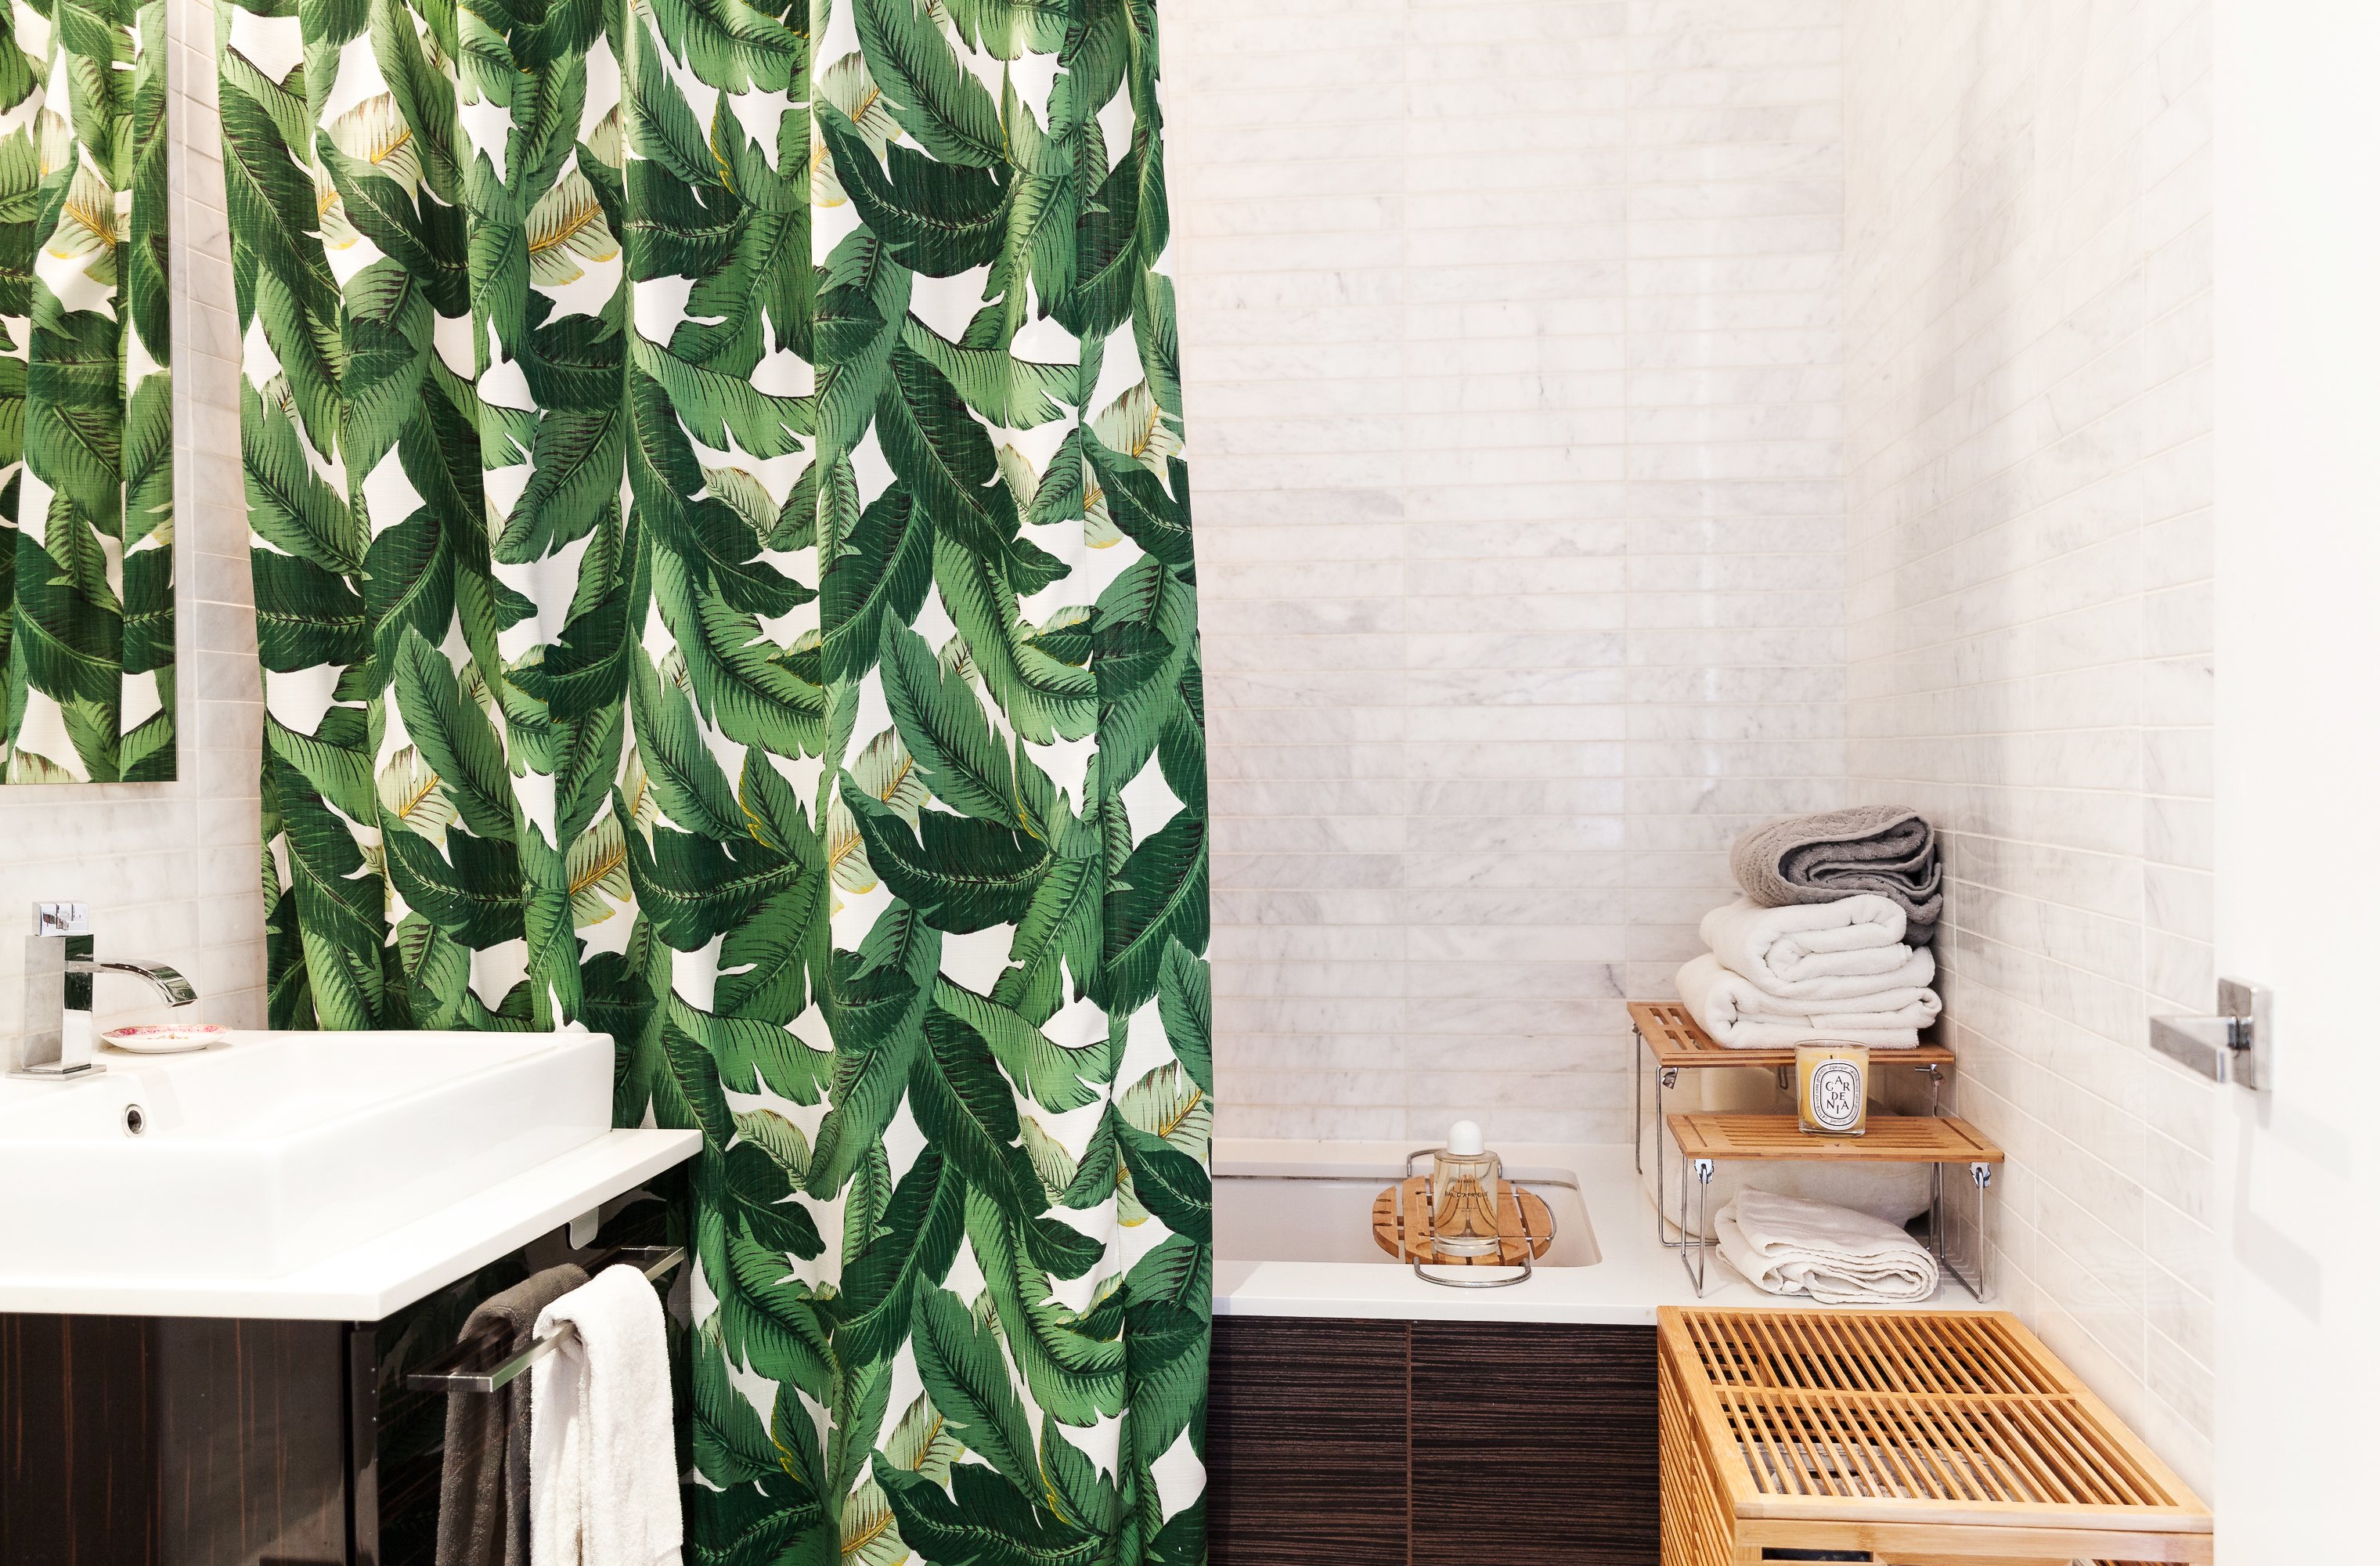 How To Clean Shower Curtain Liner, Beverly Hills Hotel Shower Curtain